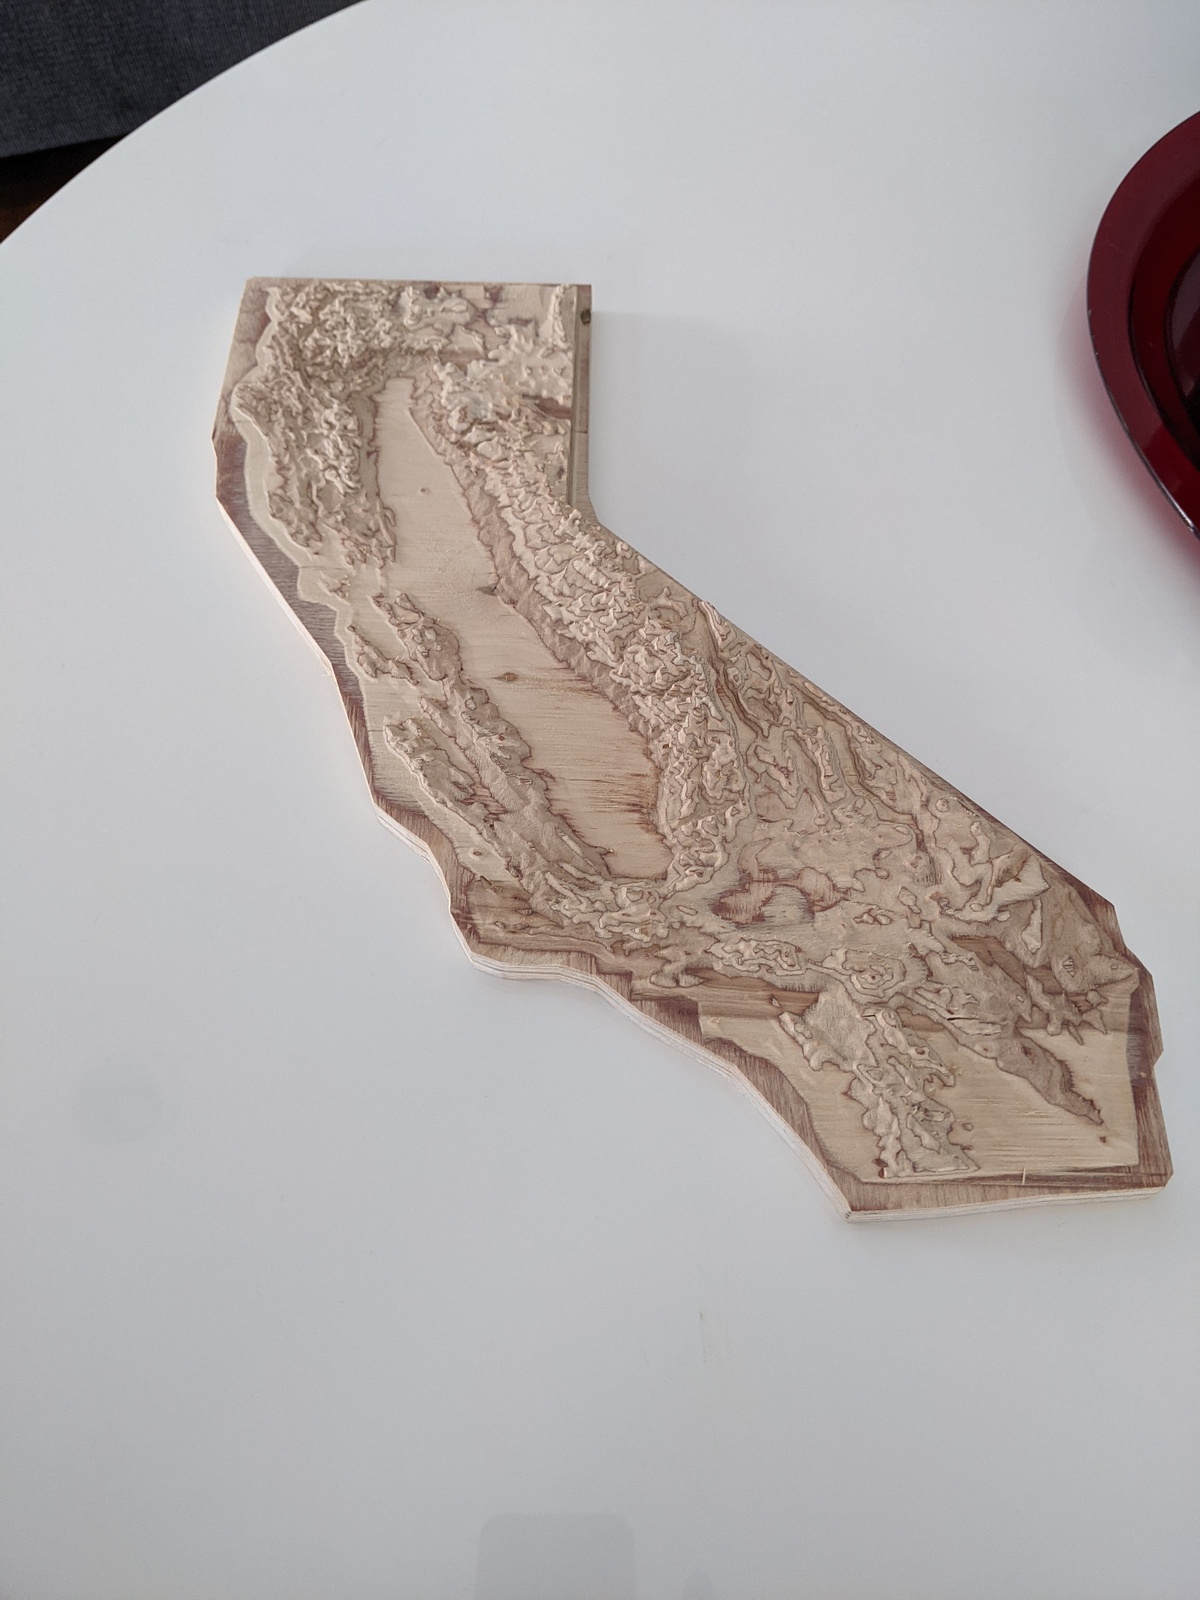 A plywood slab carved with CNC into a topographic representation of California